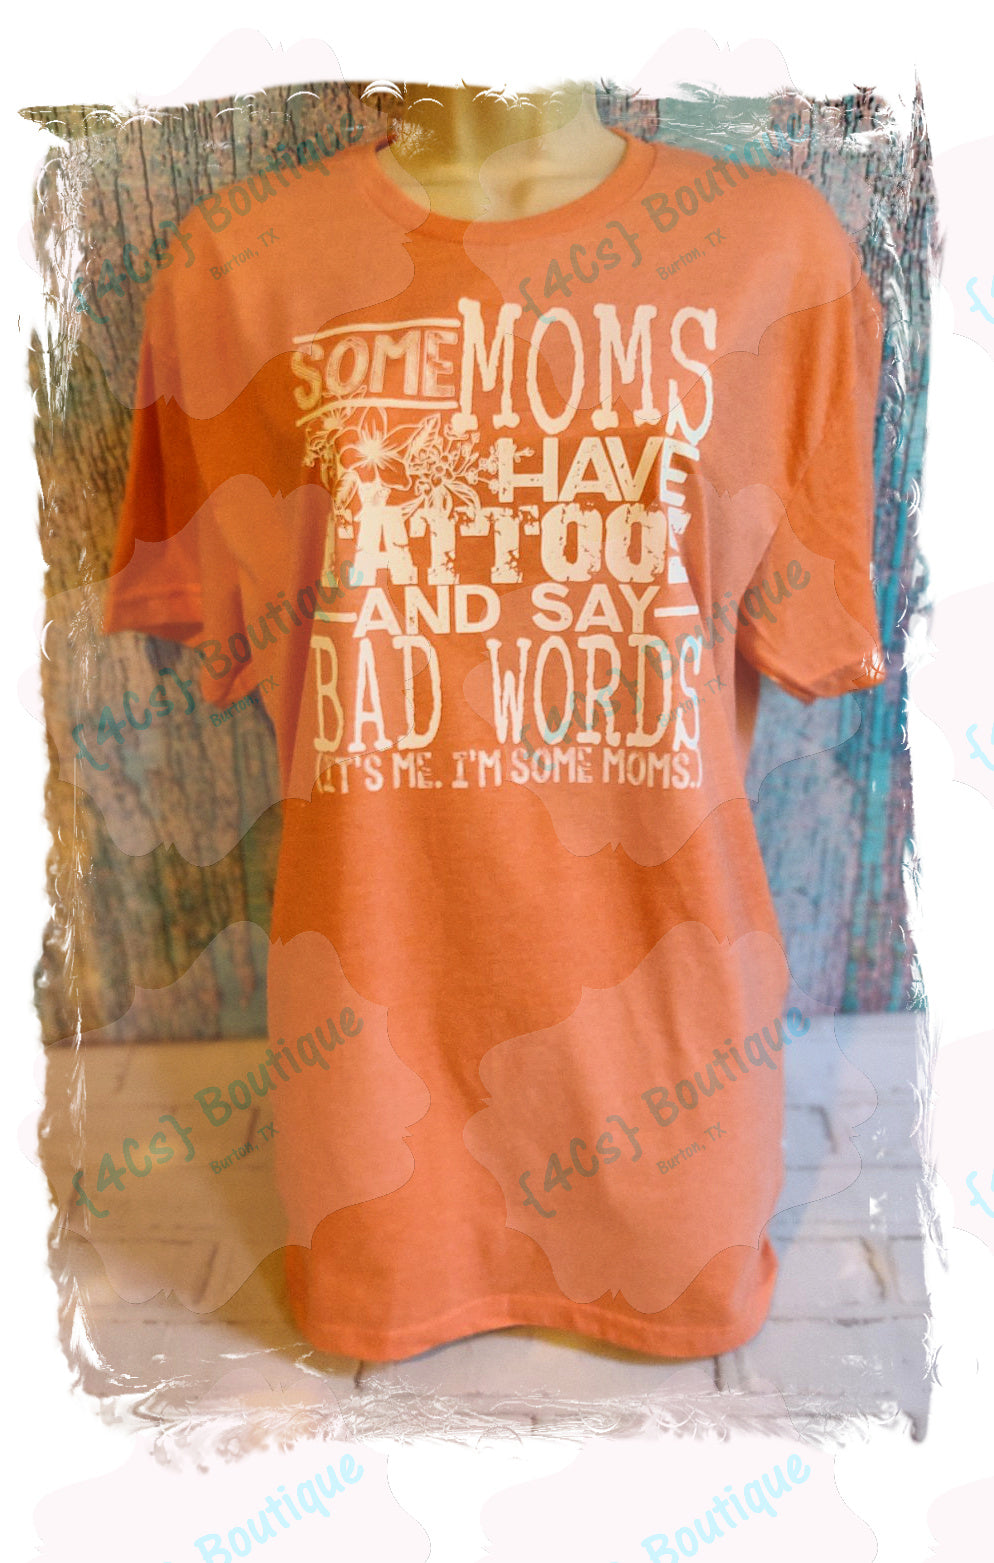 Some Moms Have Tatoos And Say Bad Words...Shirt